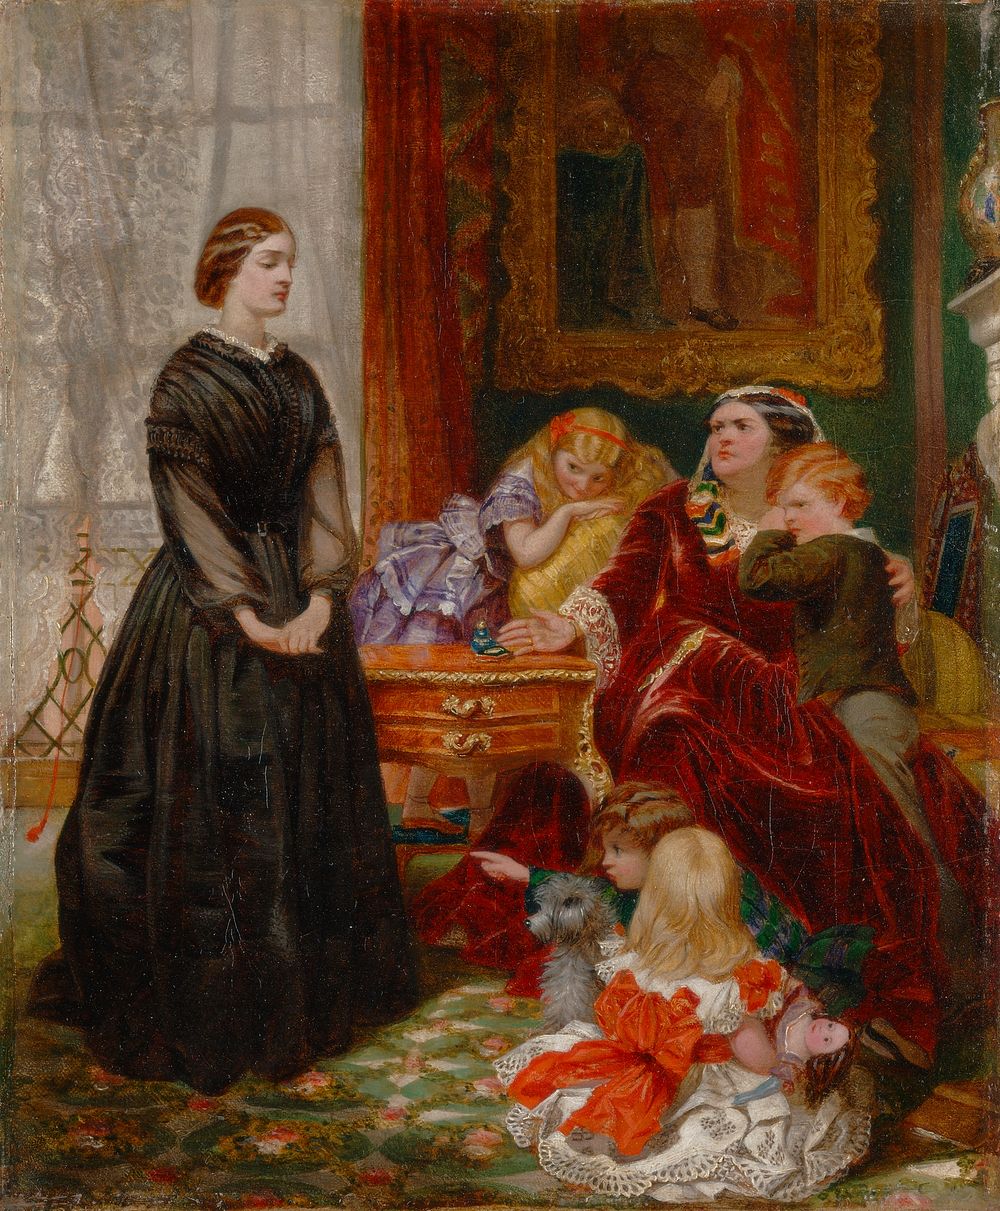 The Governess [1860, Royal Academy of Arts, London, exhibition catalogue]